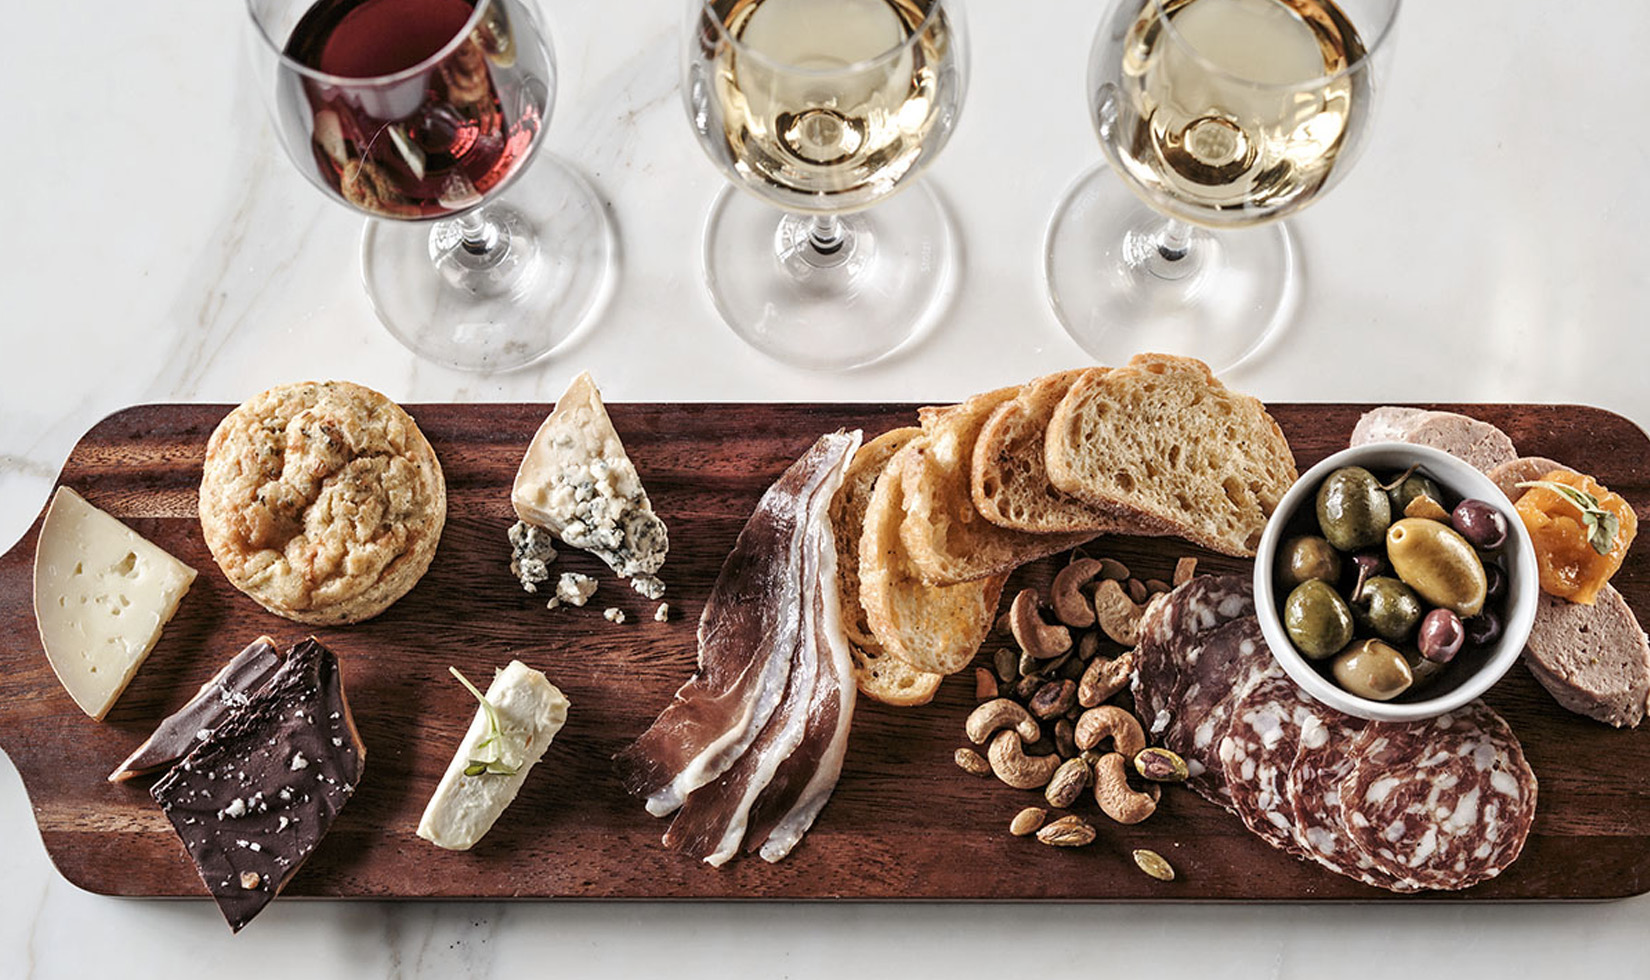 “The Board," a selection of cheese, charcuterie and accompaniments made by Ram's Gate Winery